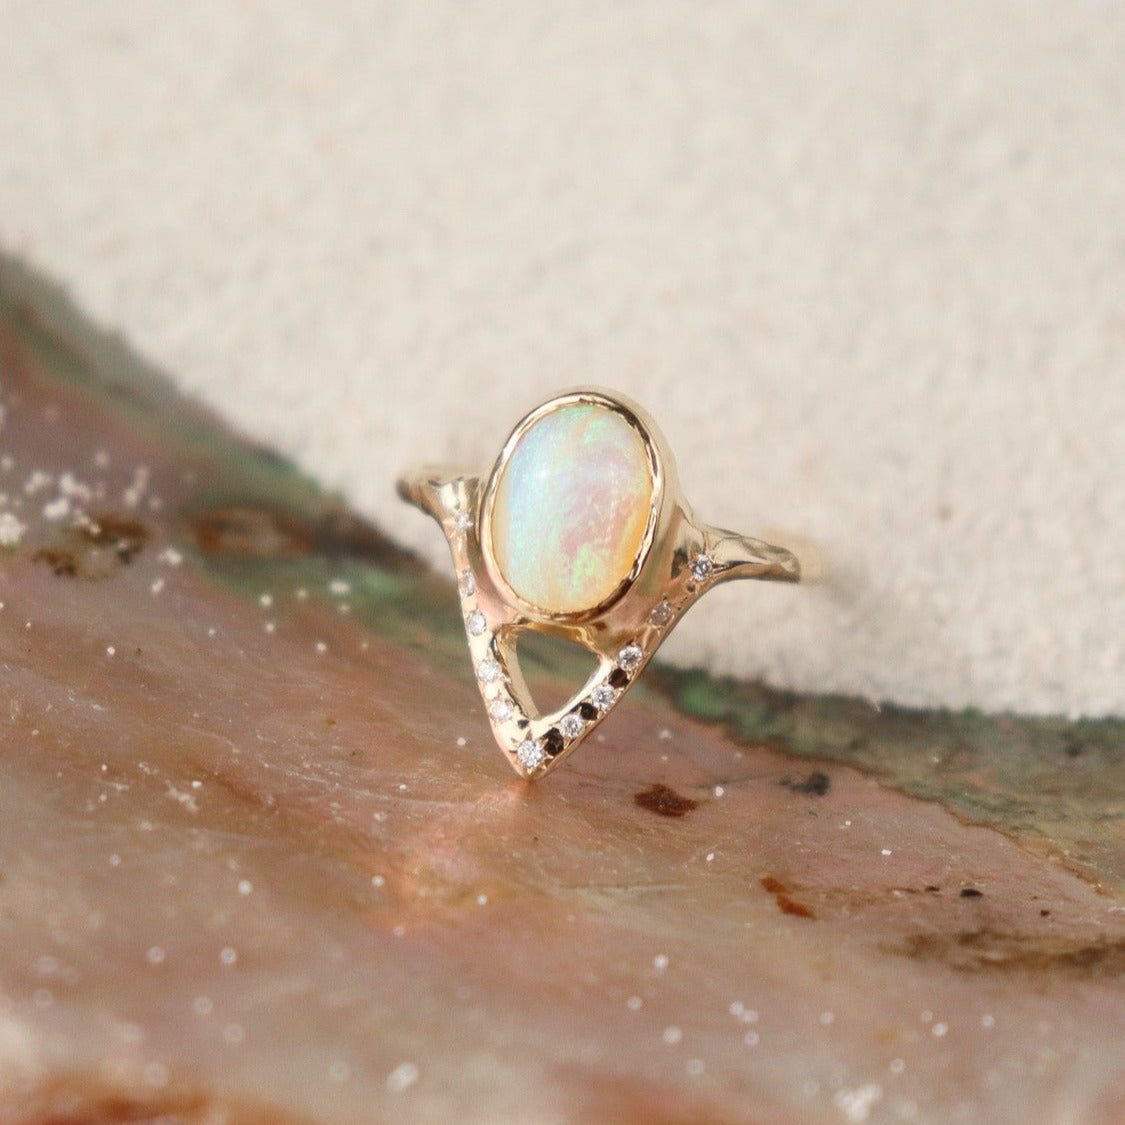 Elegant opal ring featuring a V-shaped design adorned with sparkling diamond accents.